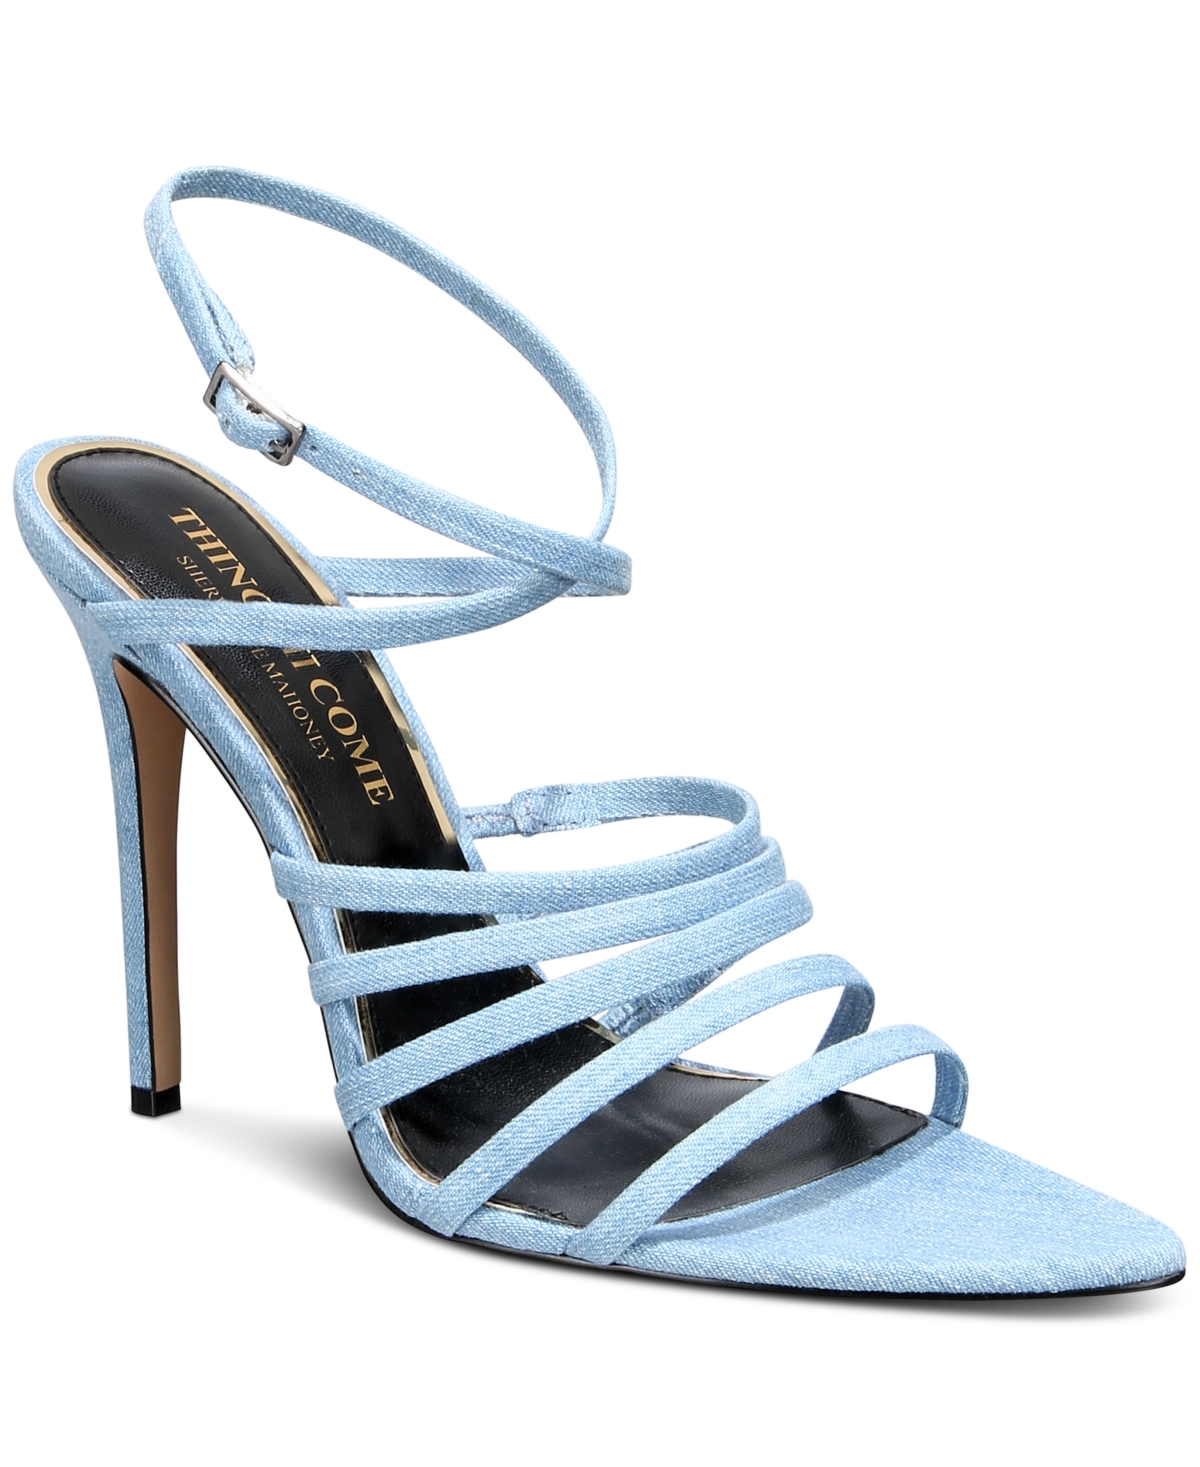 Shop Things Ii Come Women's Salsa Luxurious Strappy Pointed-toe Pumps In Blue Jean Denim